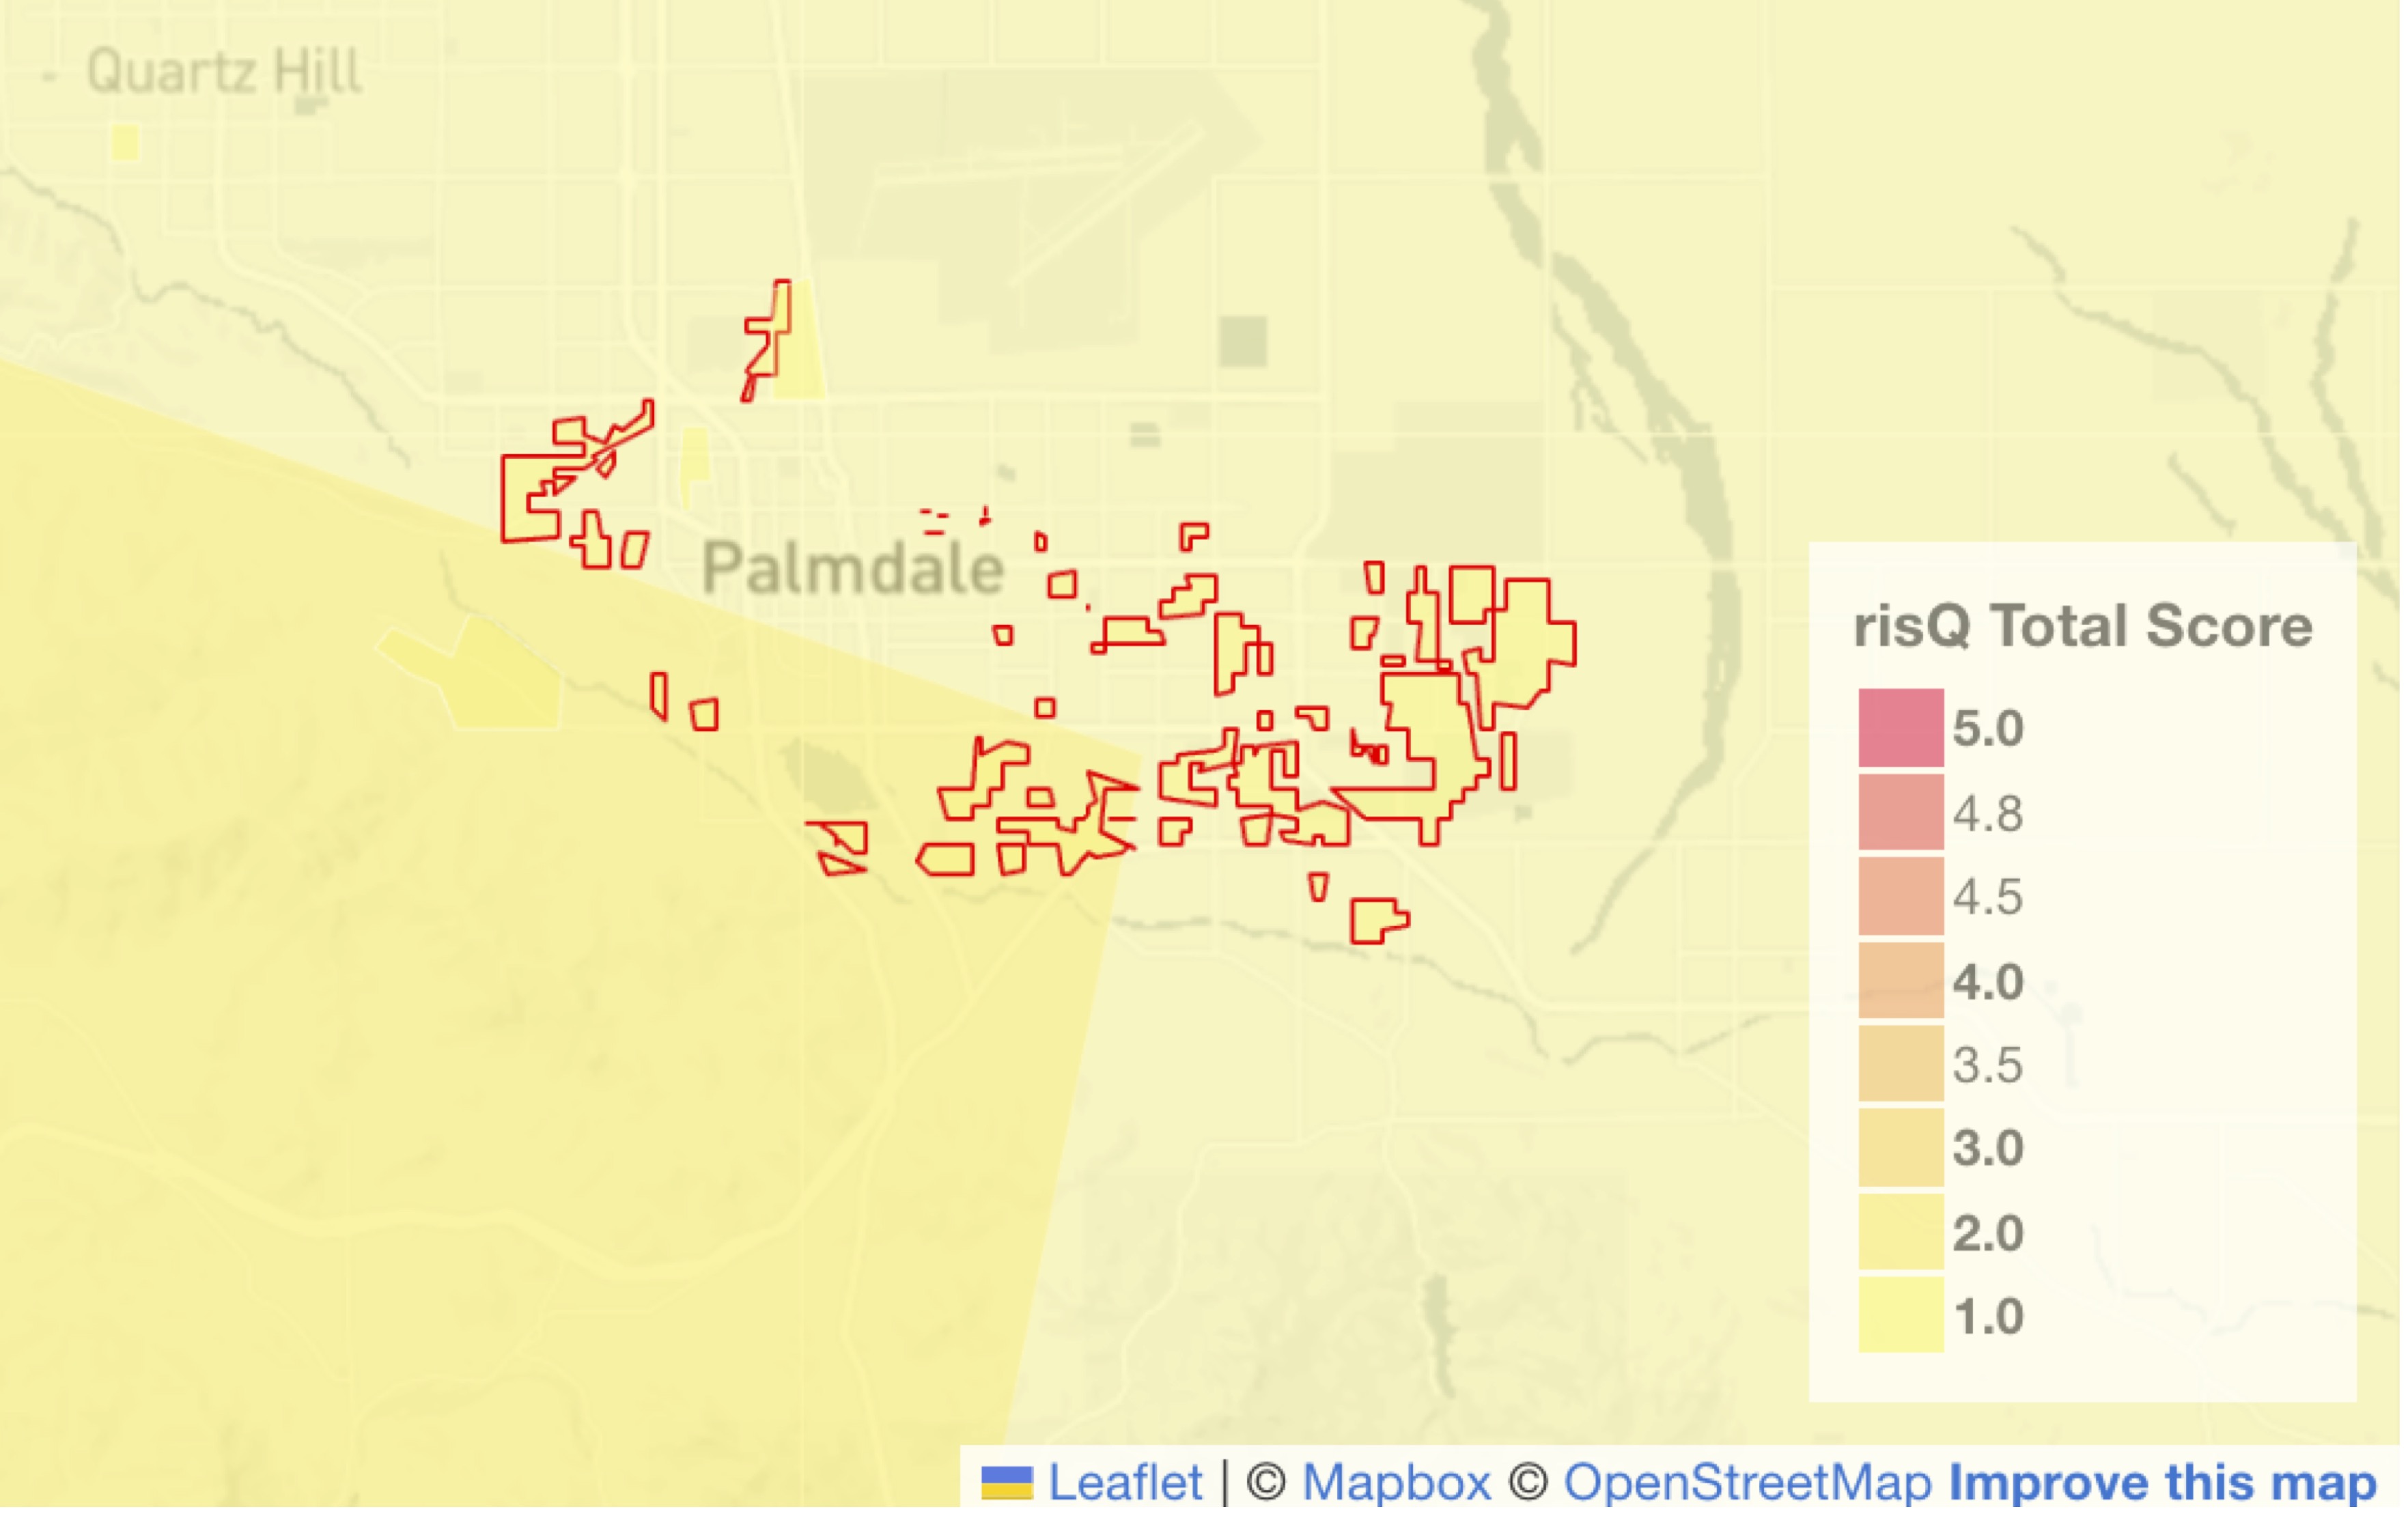 FIGURE 3. An updated boundary for a community facilities district in Palmdale, California with the ICE Climate Risk Score (risQ Score) included in shades of red. Source: ICE Sustainable Finance as of 3/15/2024.